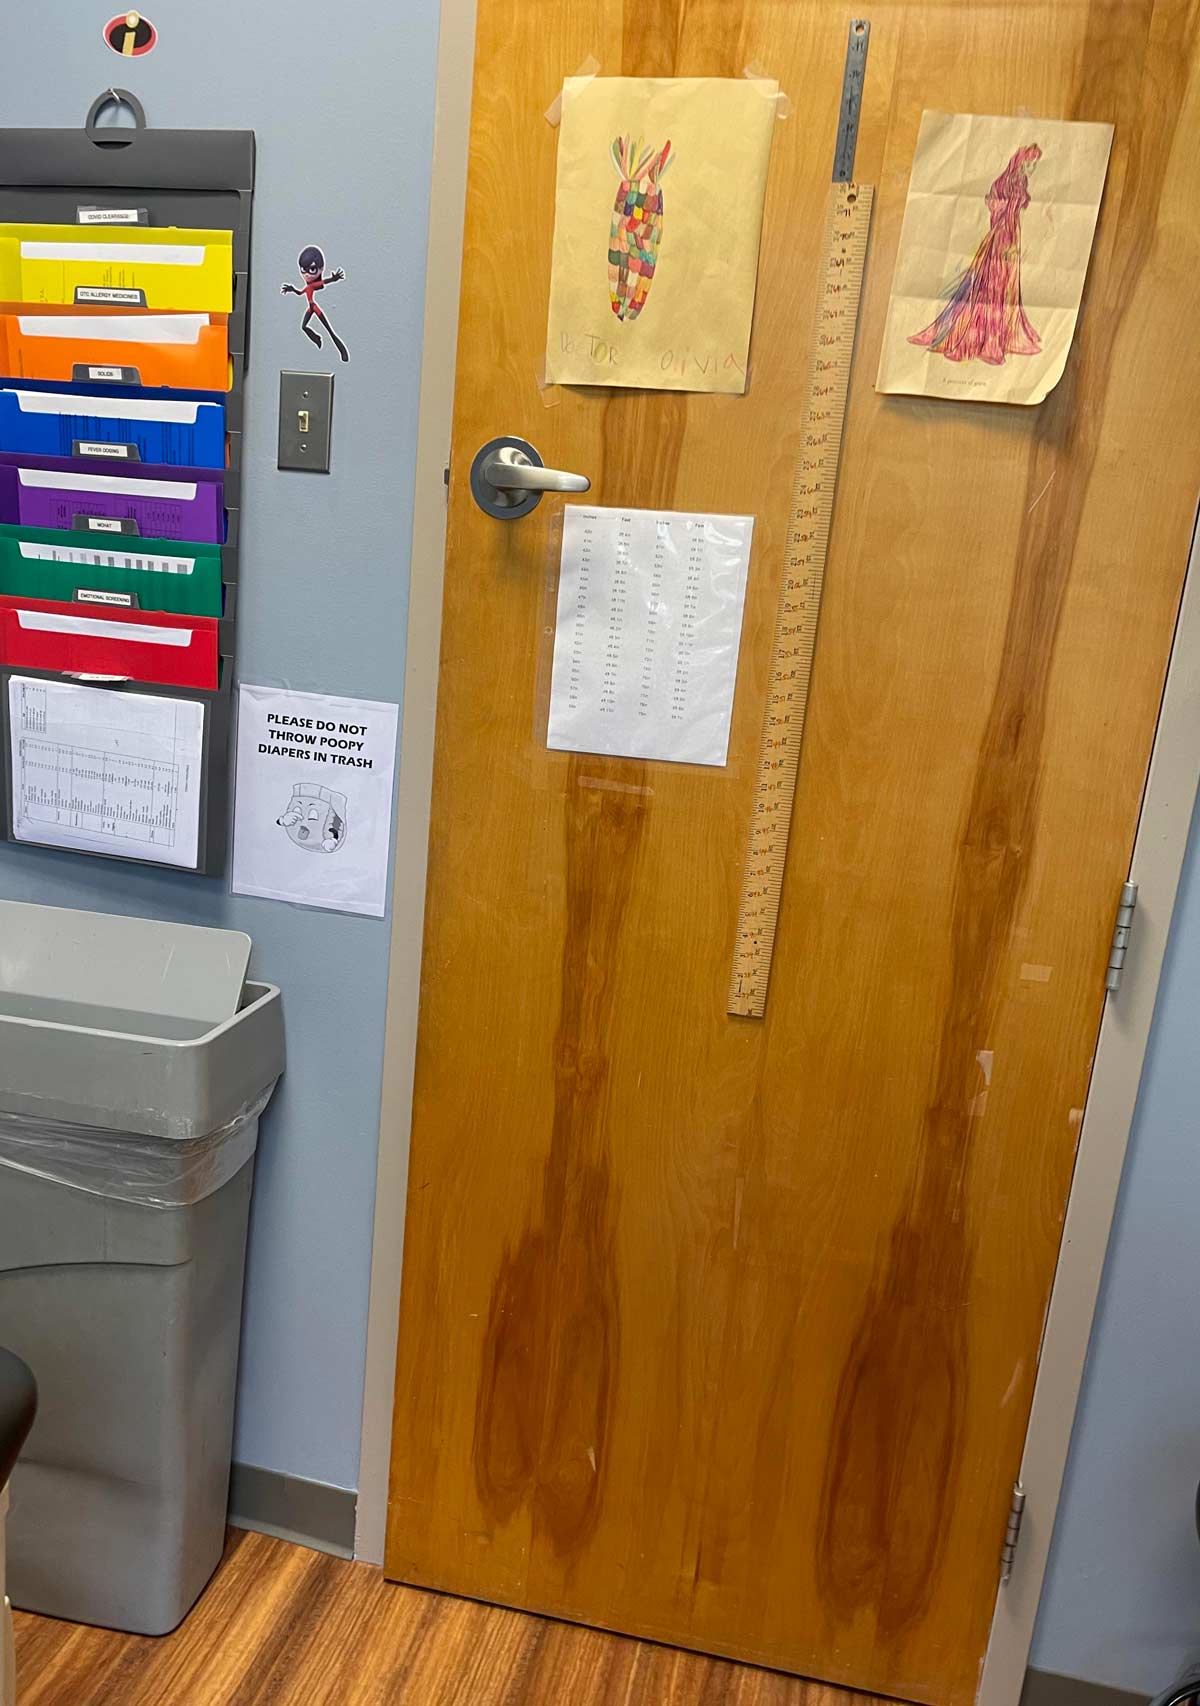 My daughter’s pediatrician has higher door handles so kids can’t run out of the room